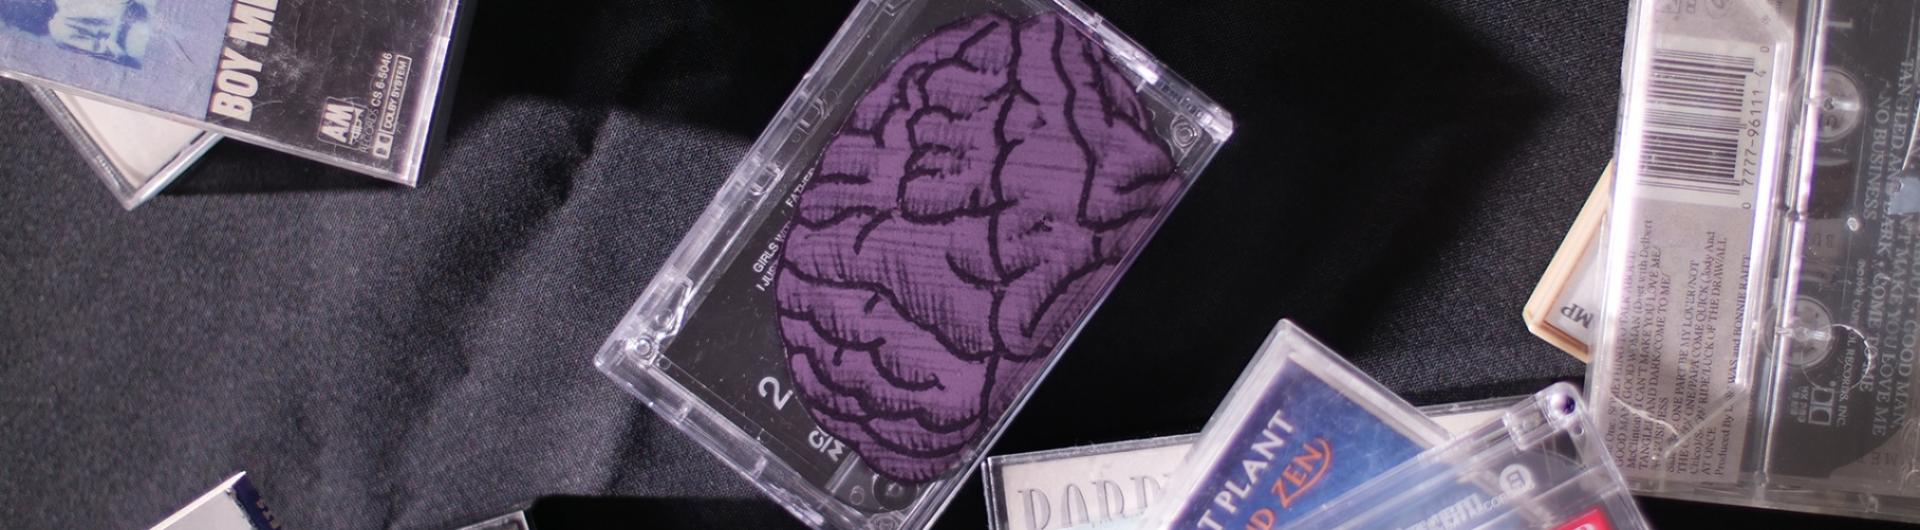 Audio Cassettes with a paper brain